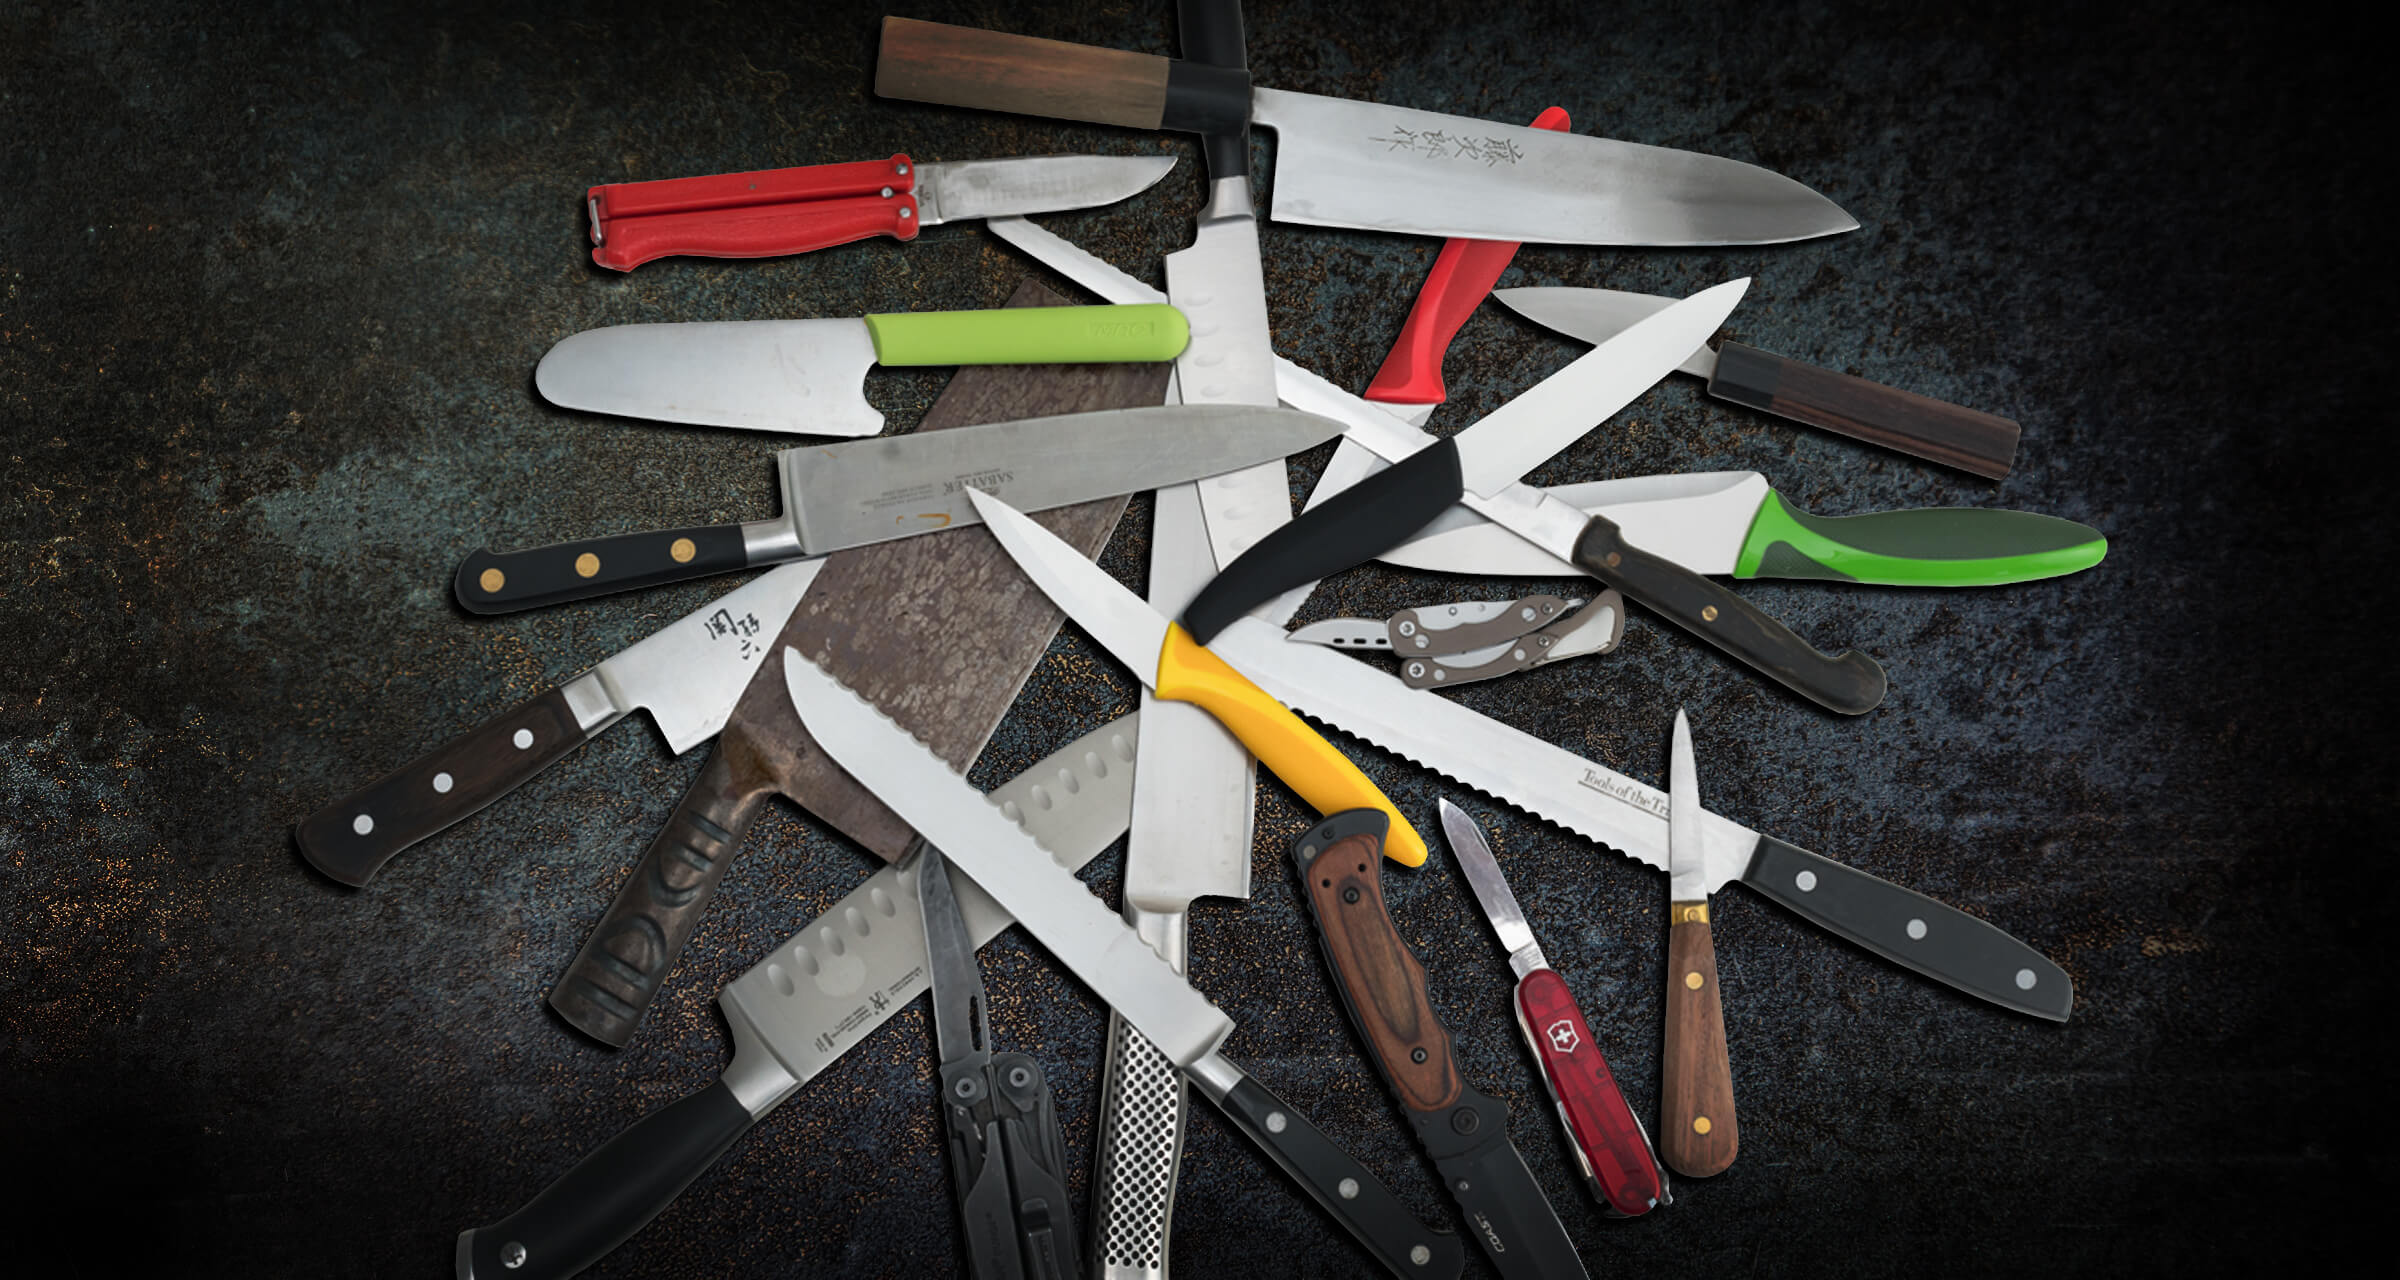 Decorative image showing multiple knives of all sizes and types